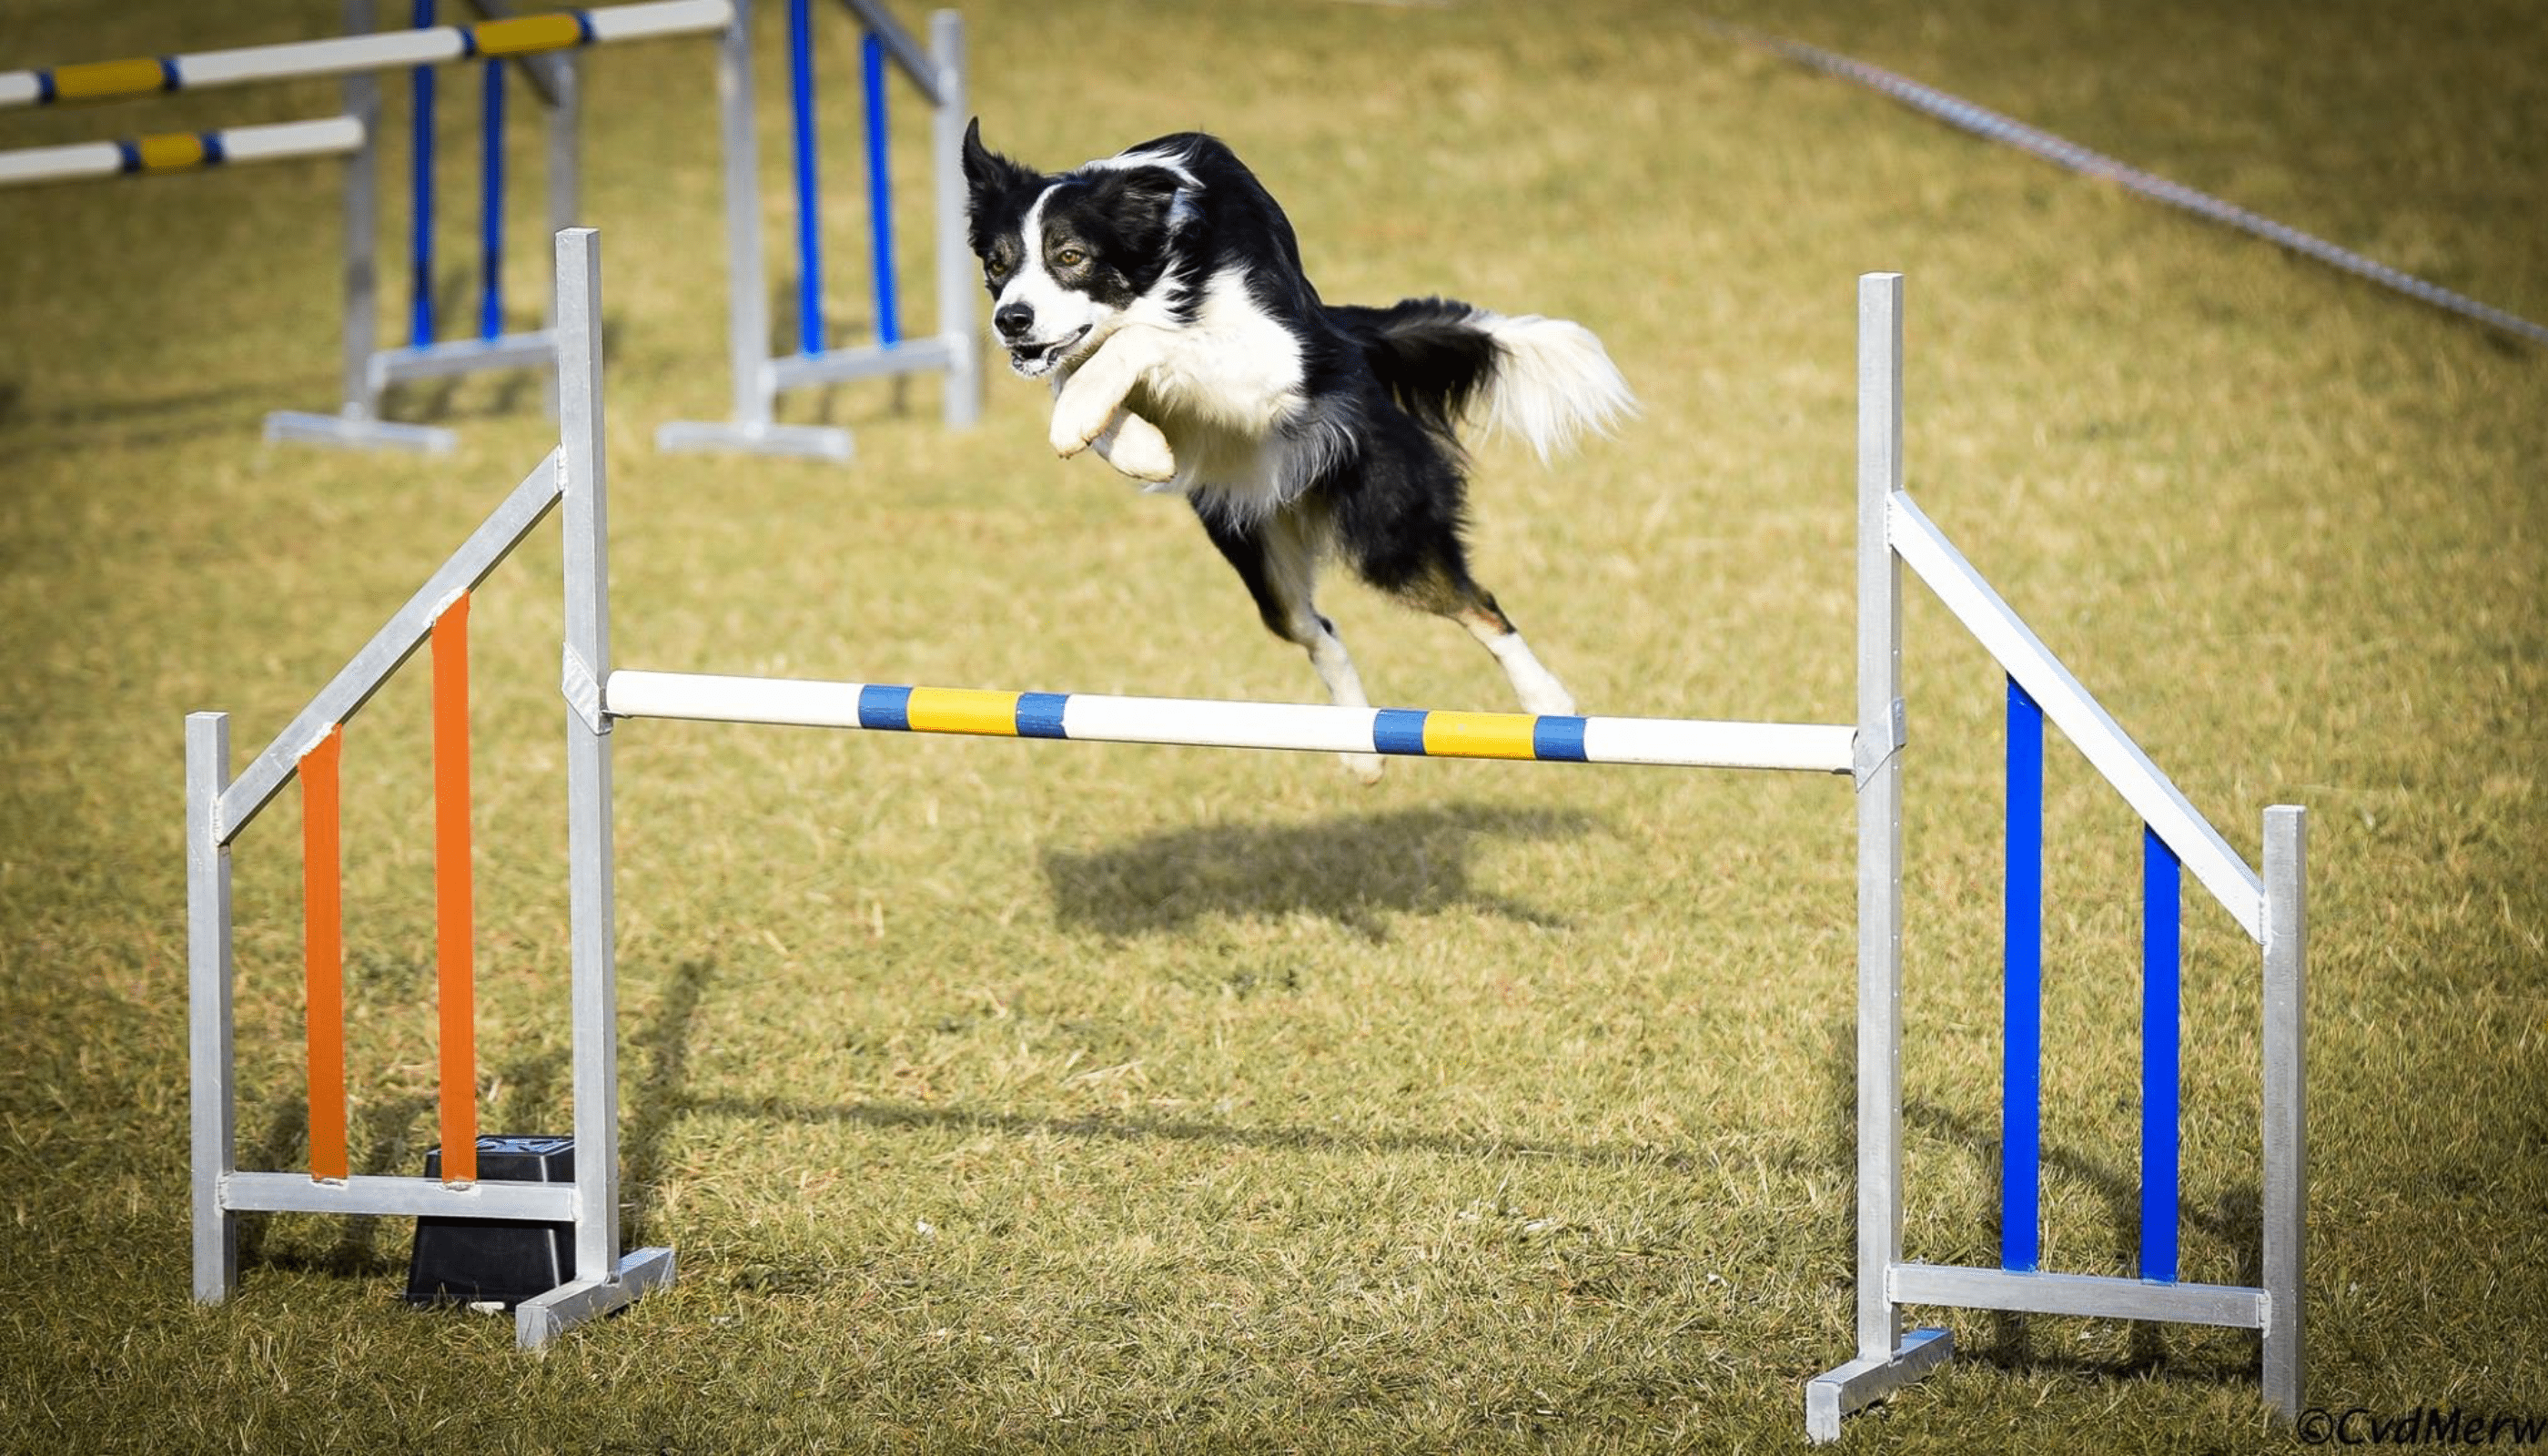 Training A Border Collie For Agility Competitions